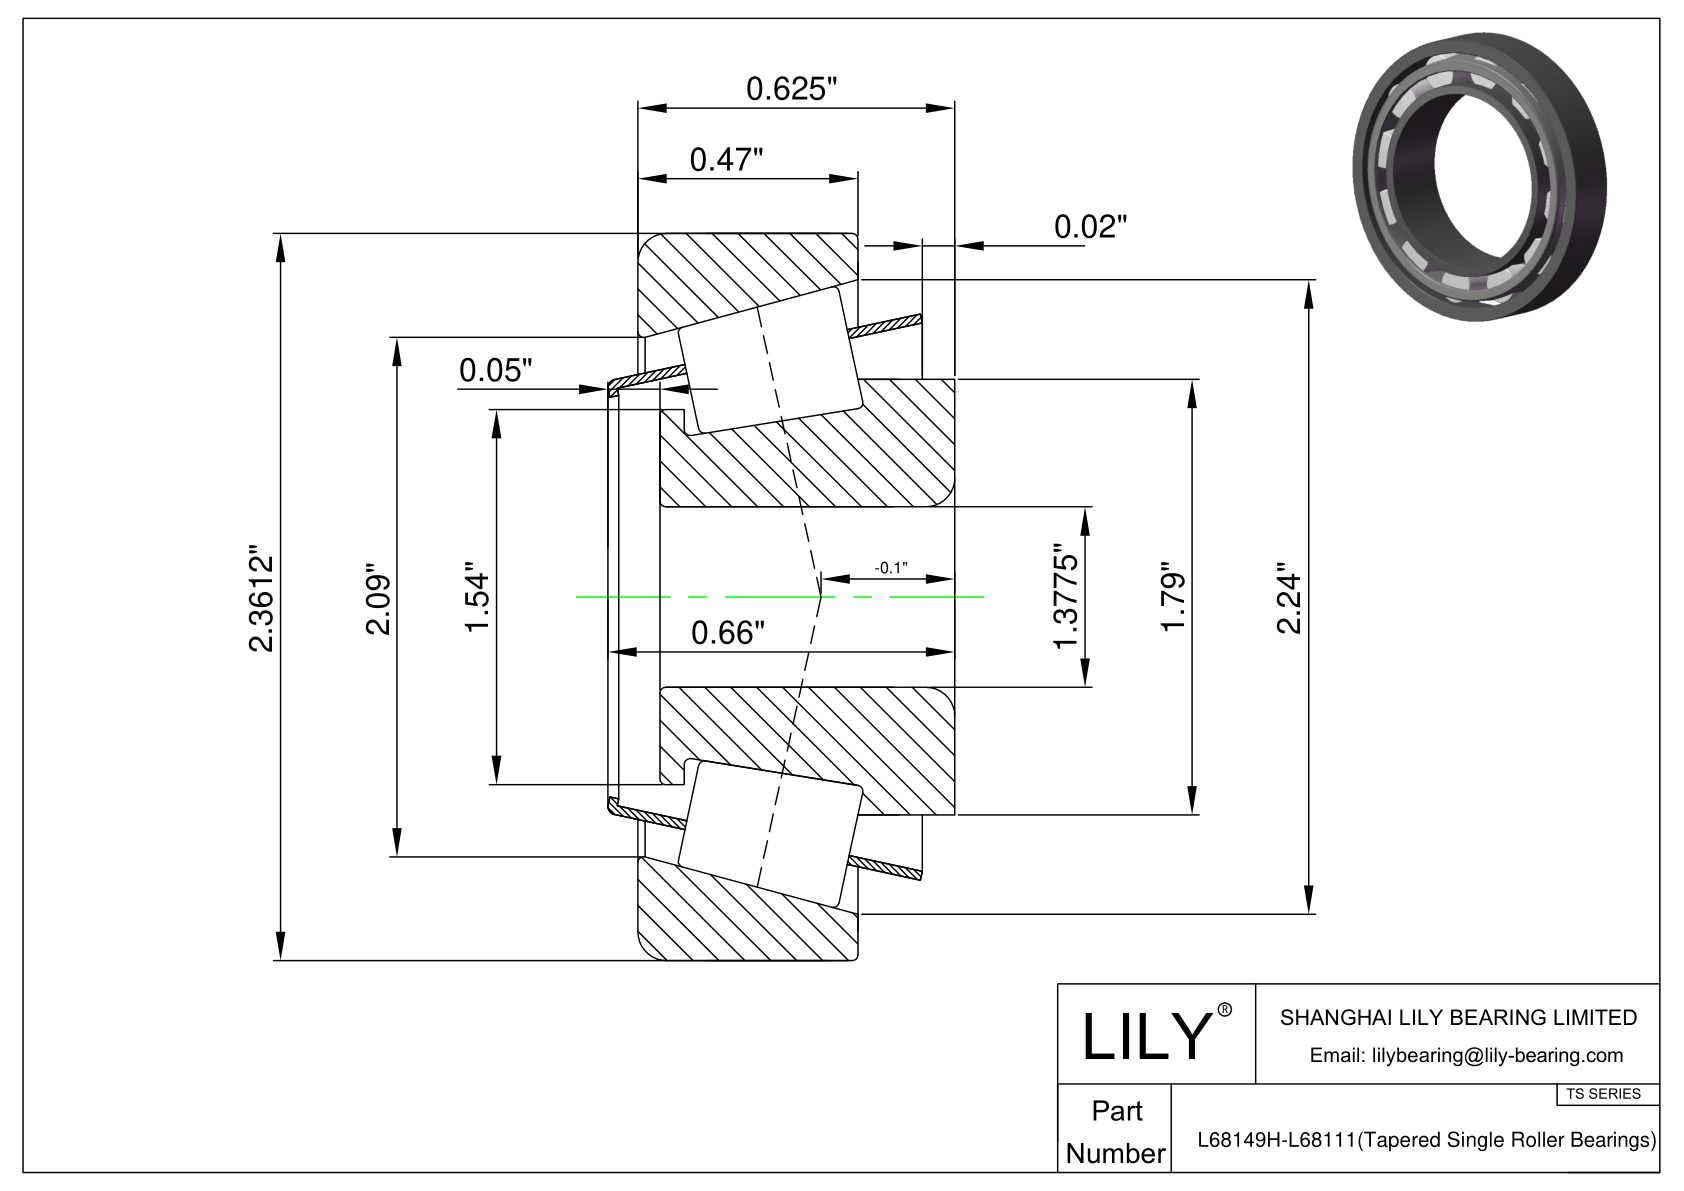 L68149H-L68111 TS (Tapered Single Roller Bearings) (Imperial) cad drawing